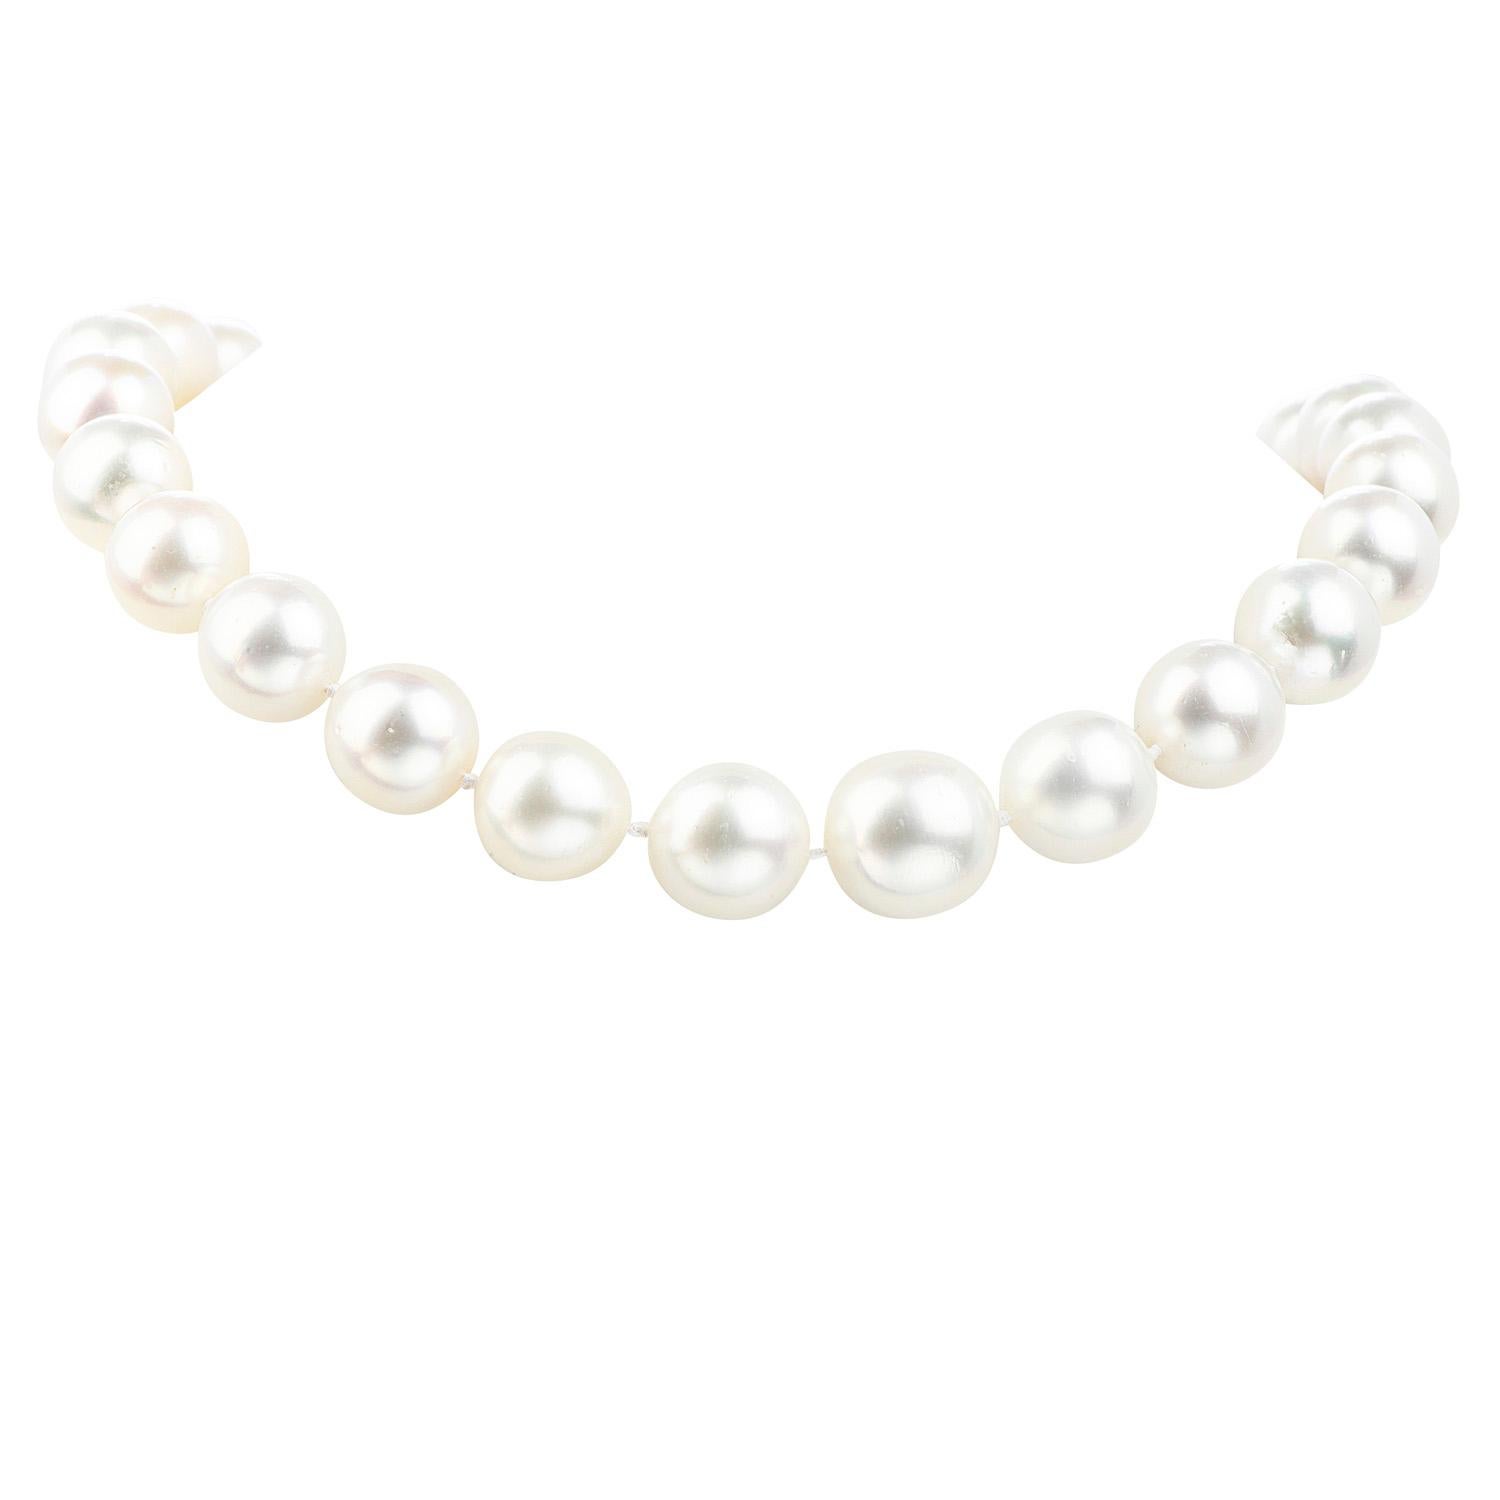 This exceptionally large South Sea Pearl necklace incorporates 33 highly lustrous South Sea pearls with some natural blemishes. The necklace is complemented by 27 graduated lustrous South Sea pearls measuring between 17mm to 14 mm. The necklace